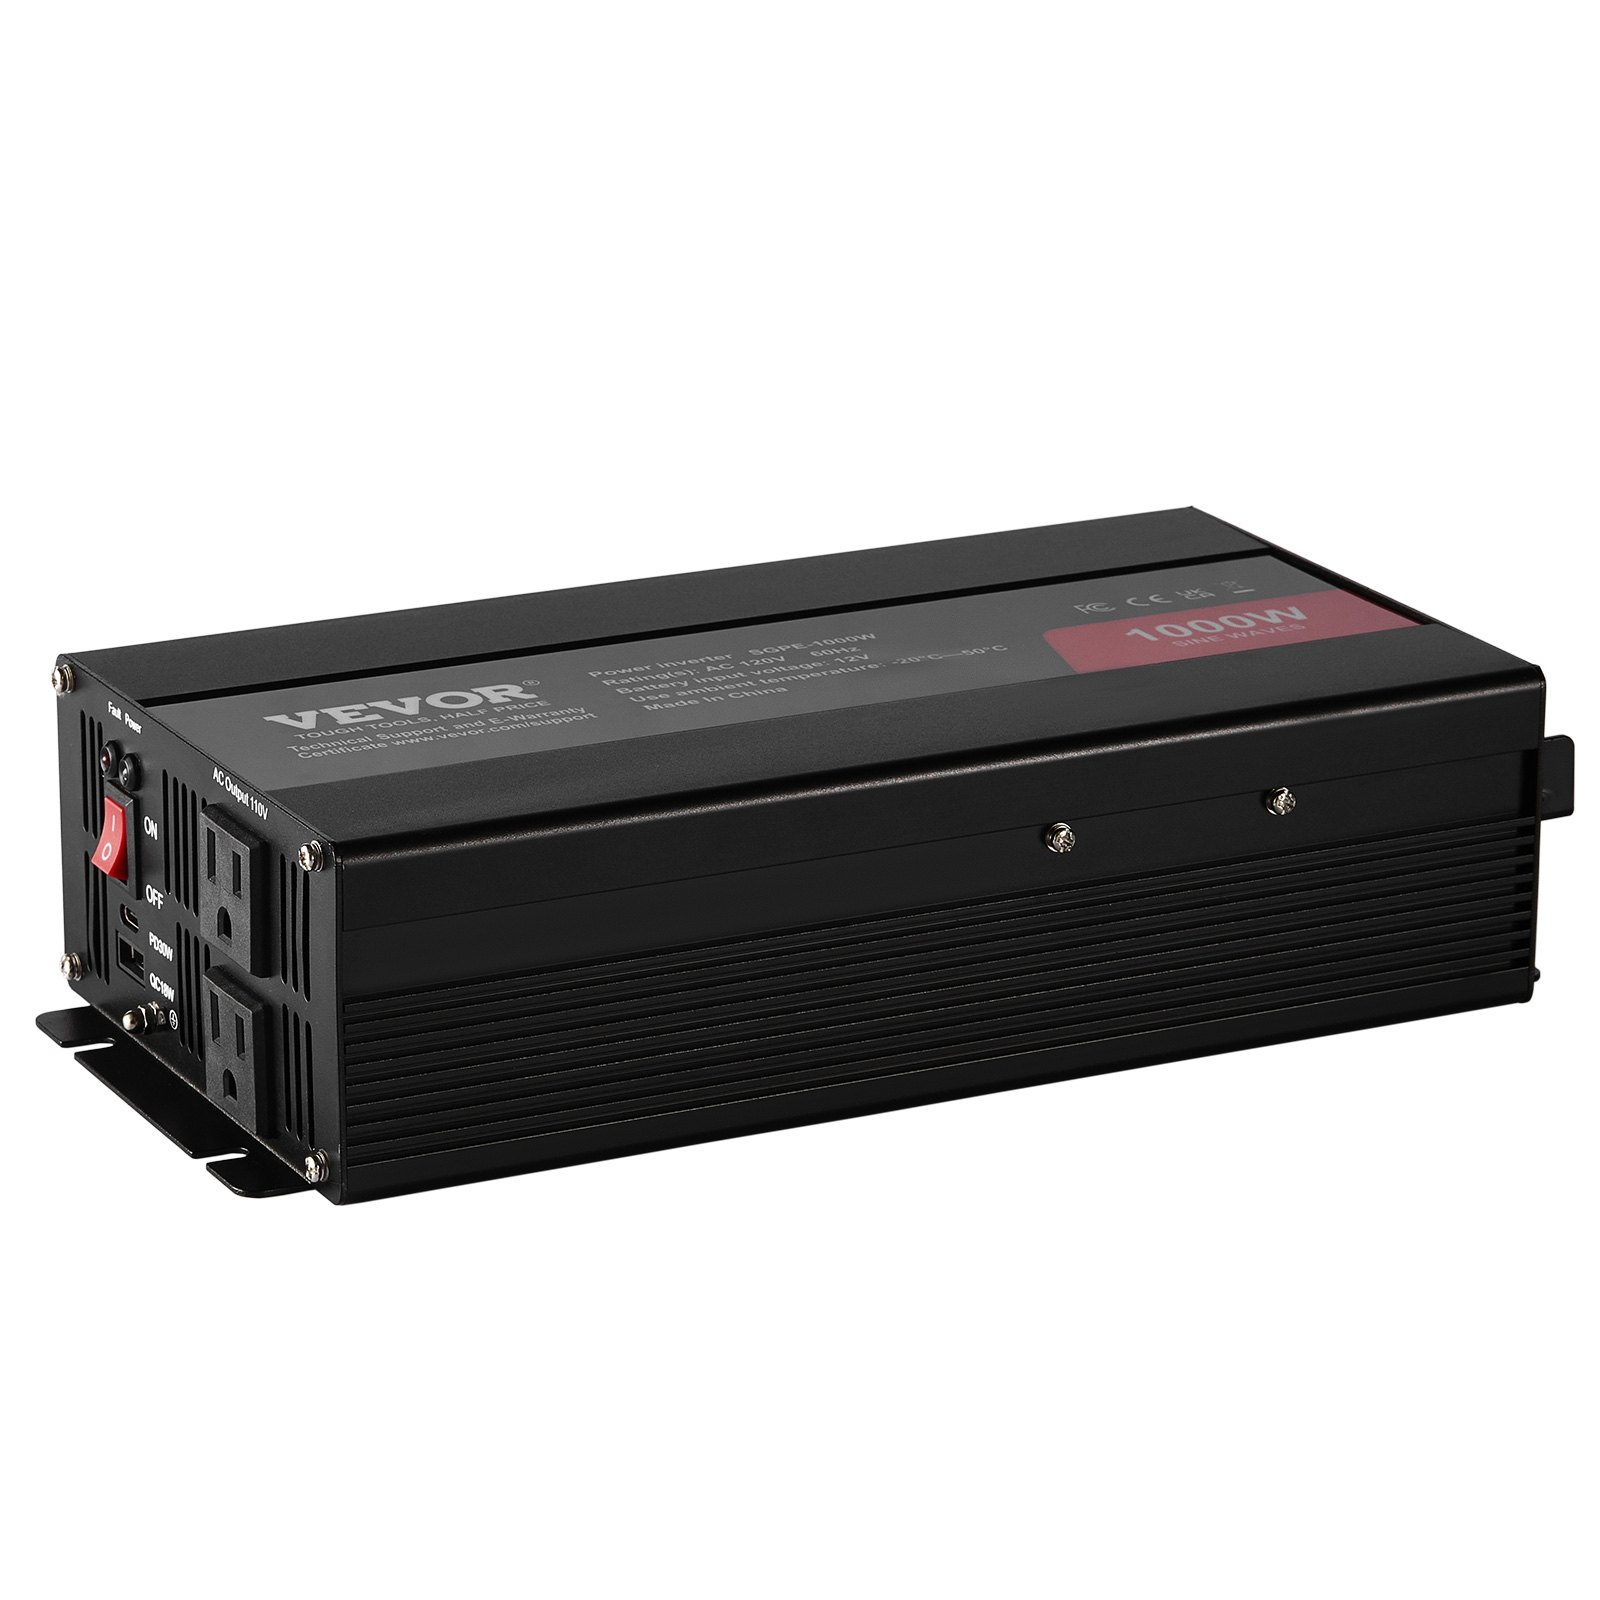 VEVOR Pure Sine Wave Inverter, 1000 Watt, DC 12V to AC 120V Power Inverter with 2 AC Outlets 2 USB Port 1 Type-C Port, Remote Control for Small Home Devices like Smartphone Laptop, CE FCC Certified, Goodies N Stuff